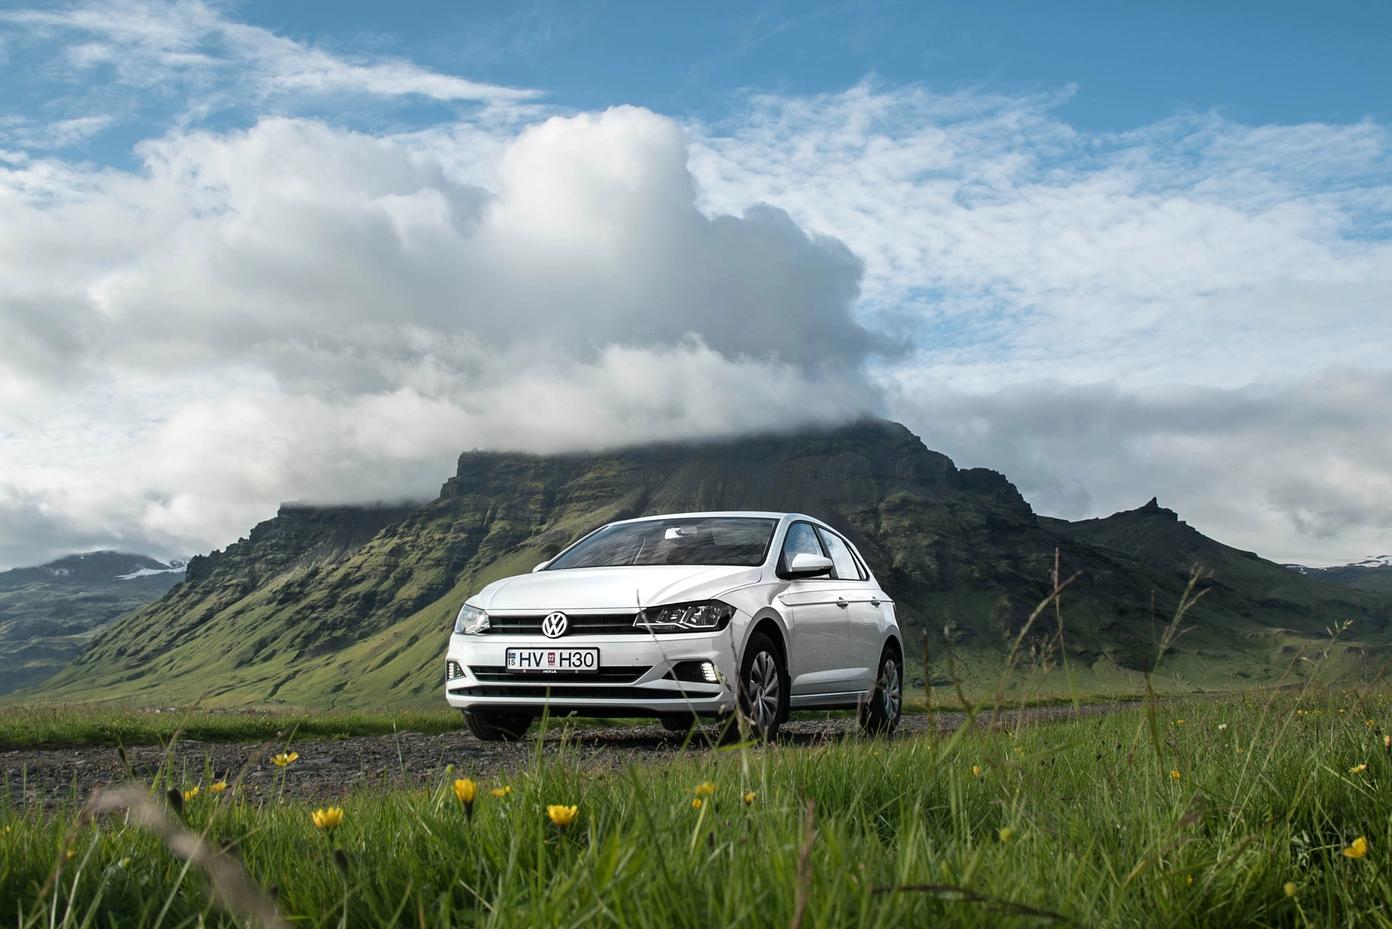 Journey through the beauty of Iceland with our reliable and stylish Volkswagen Polo rental car.